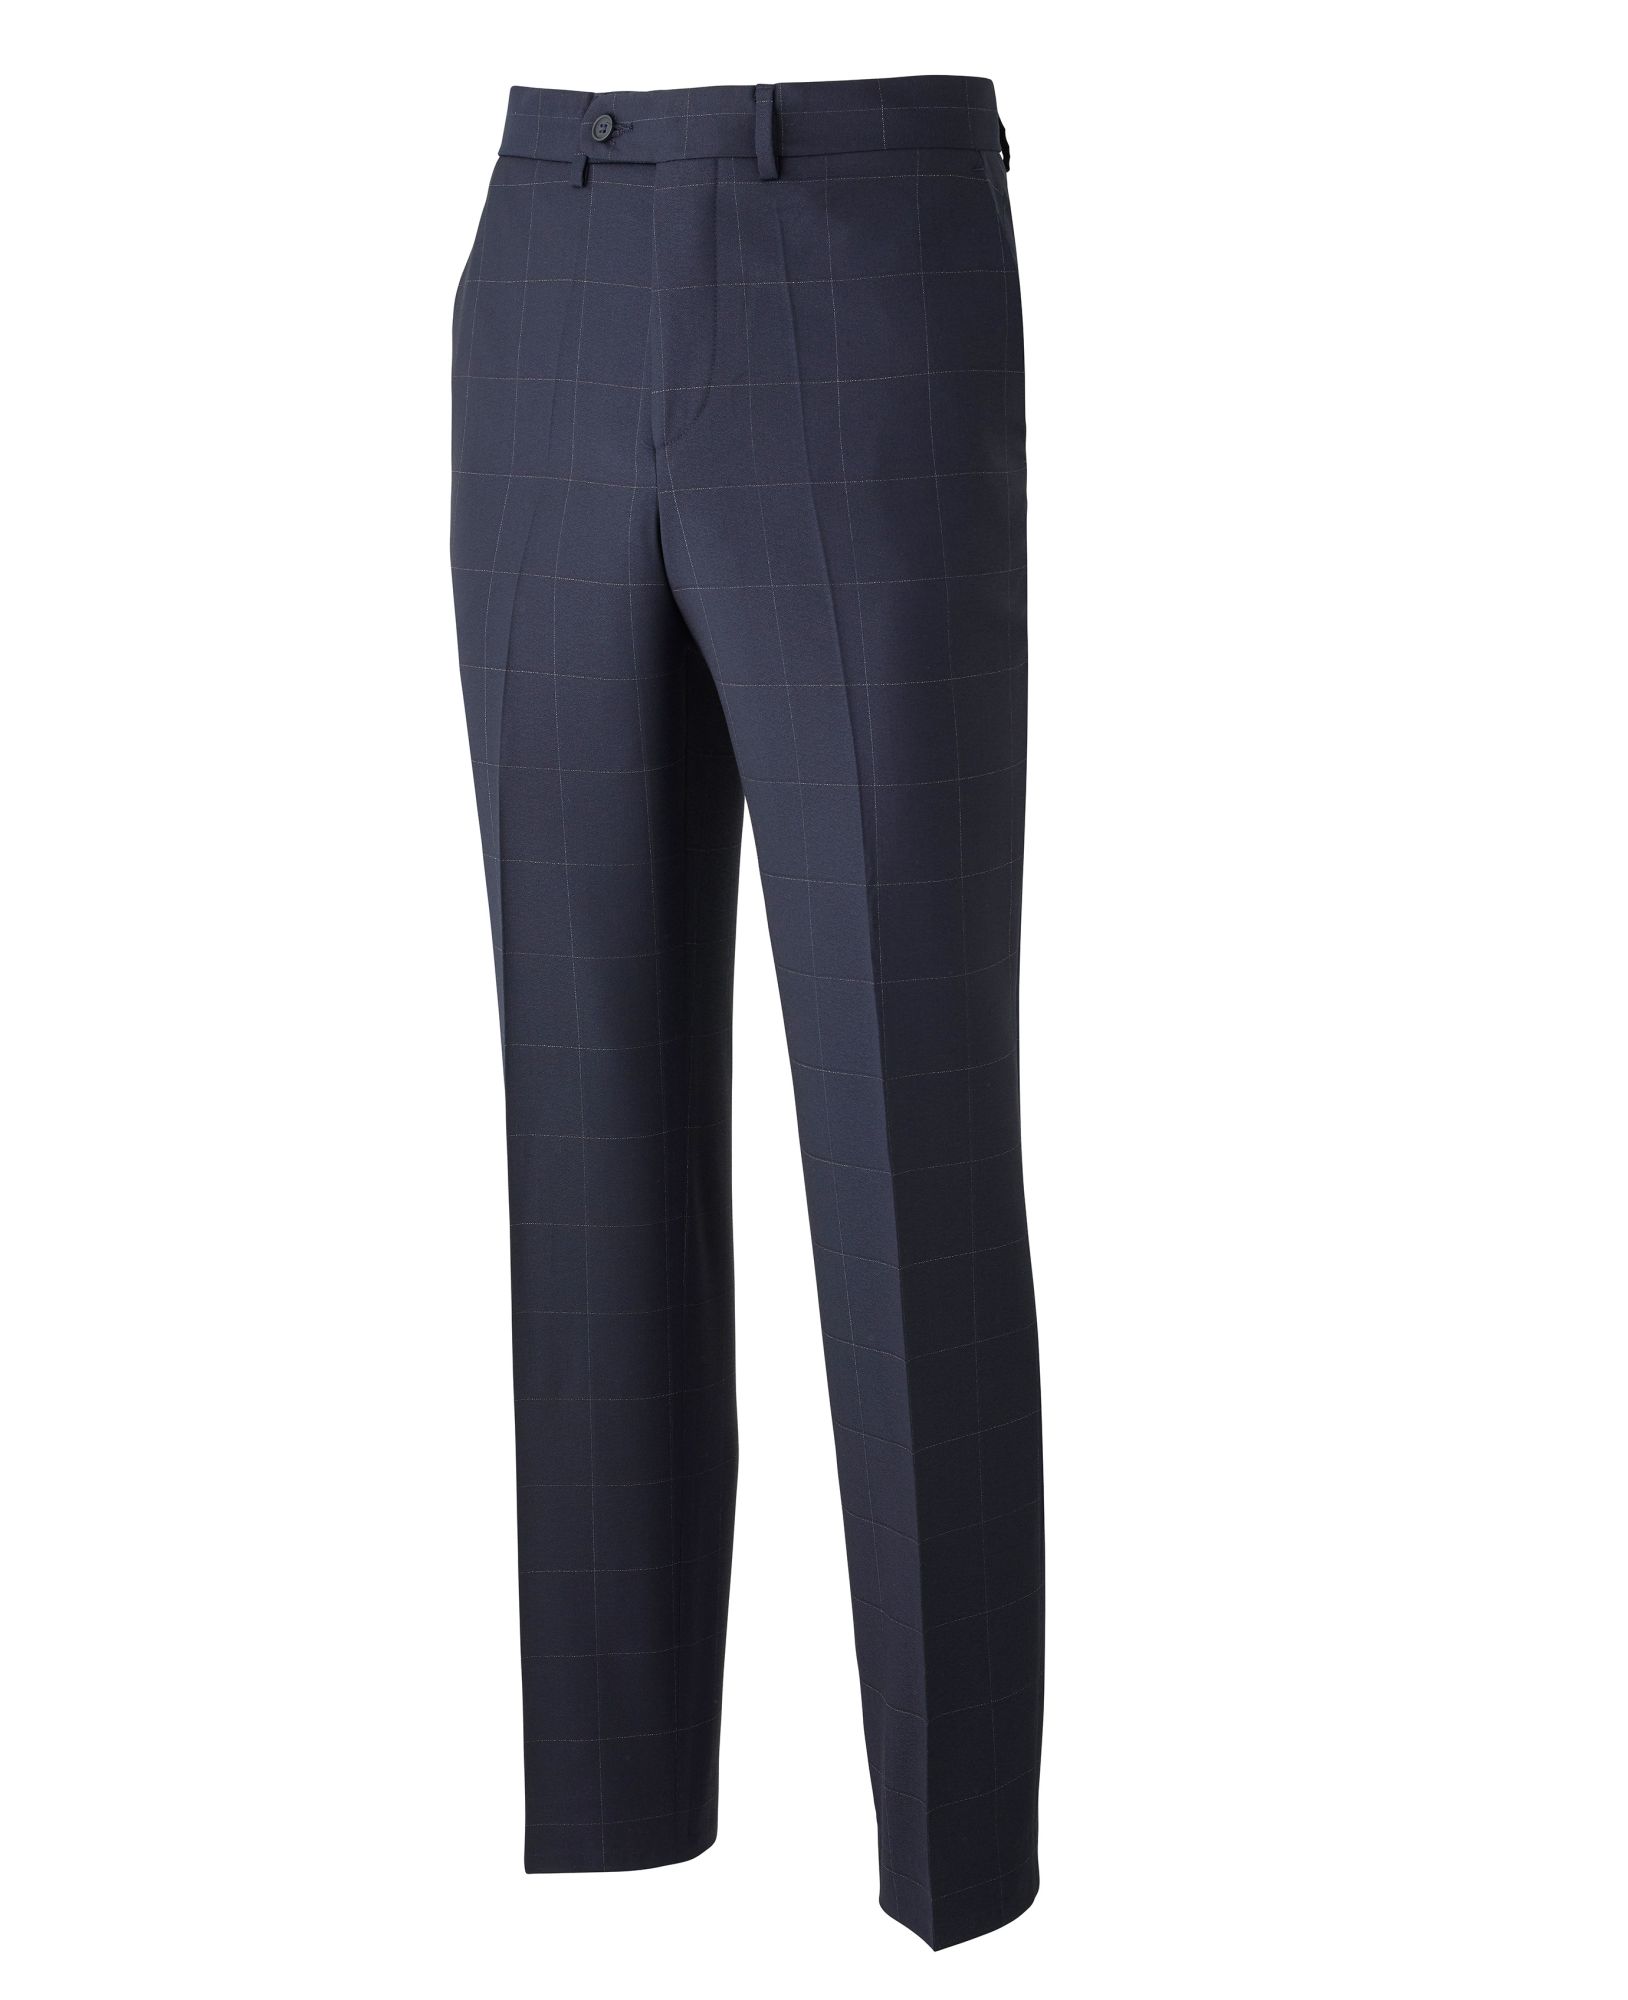 Navy Fine Windowpane Check Tailored Suit Trousers 40